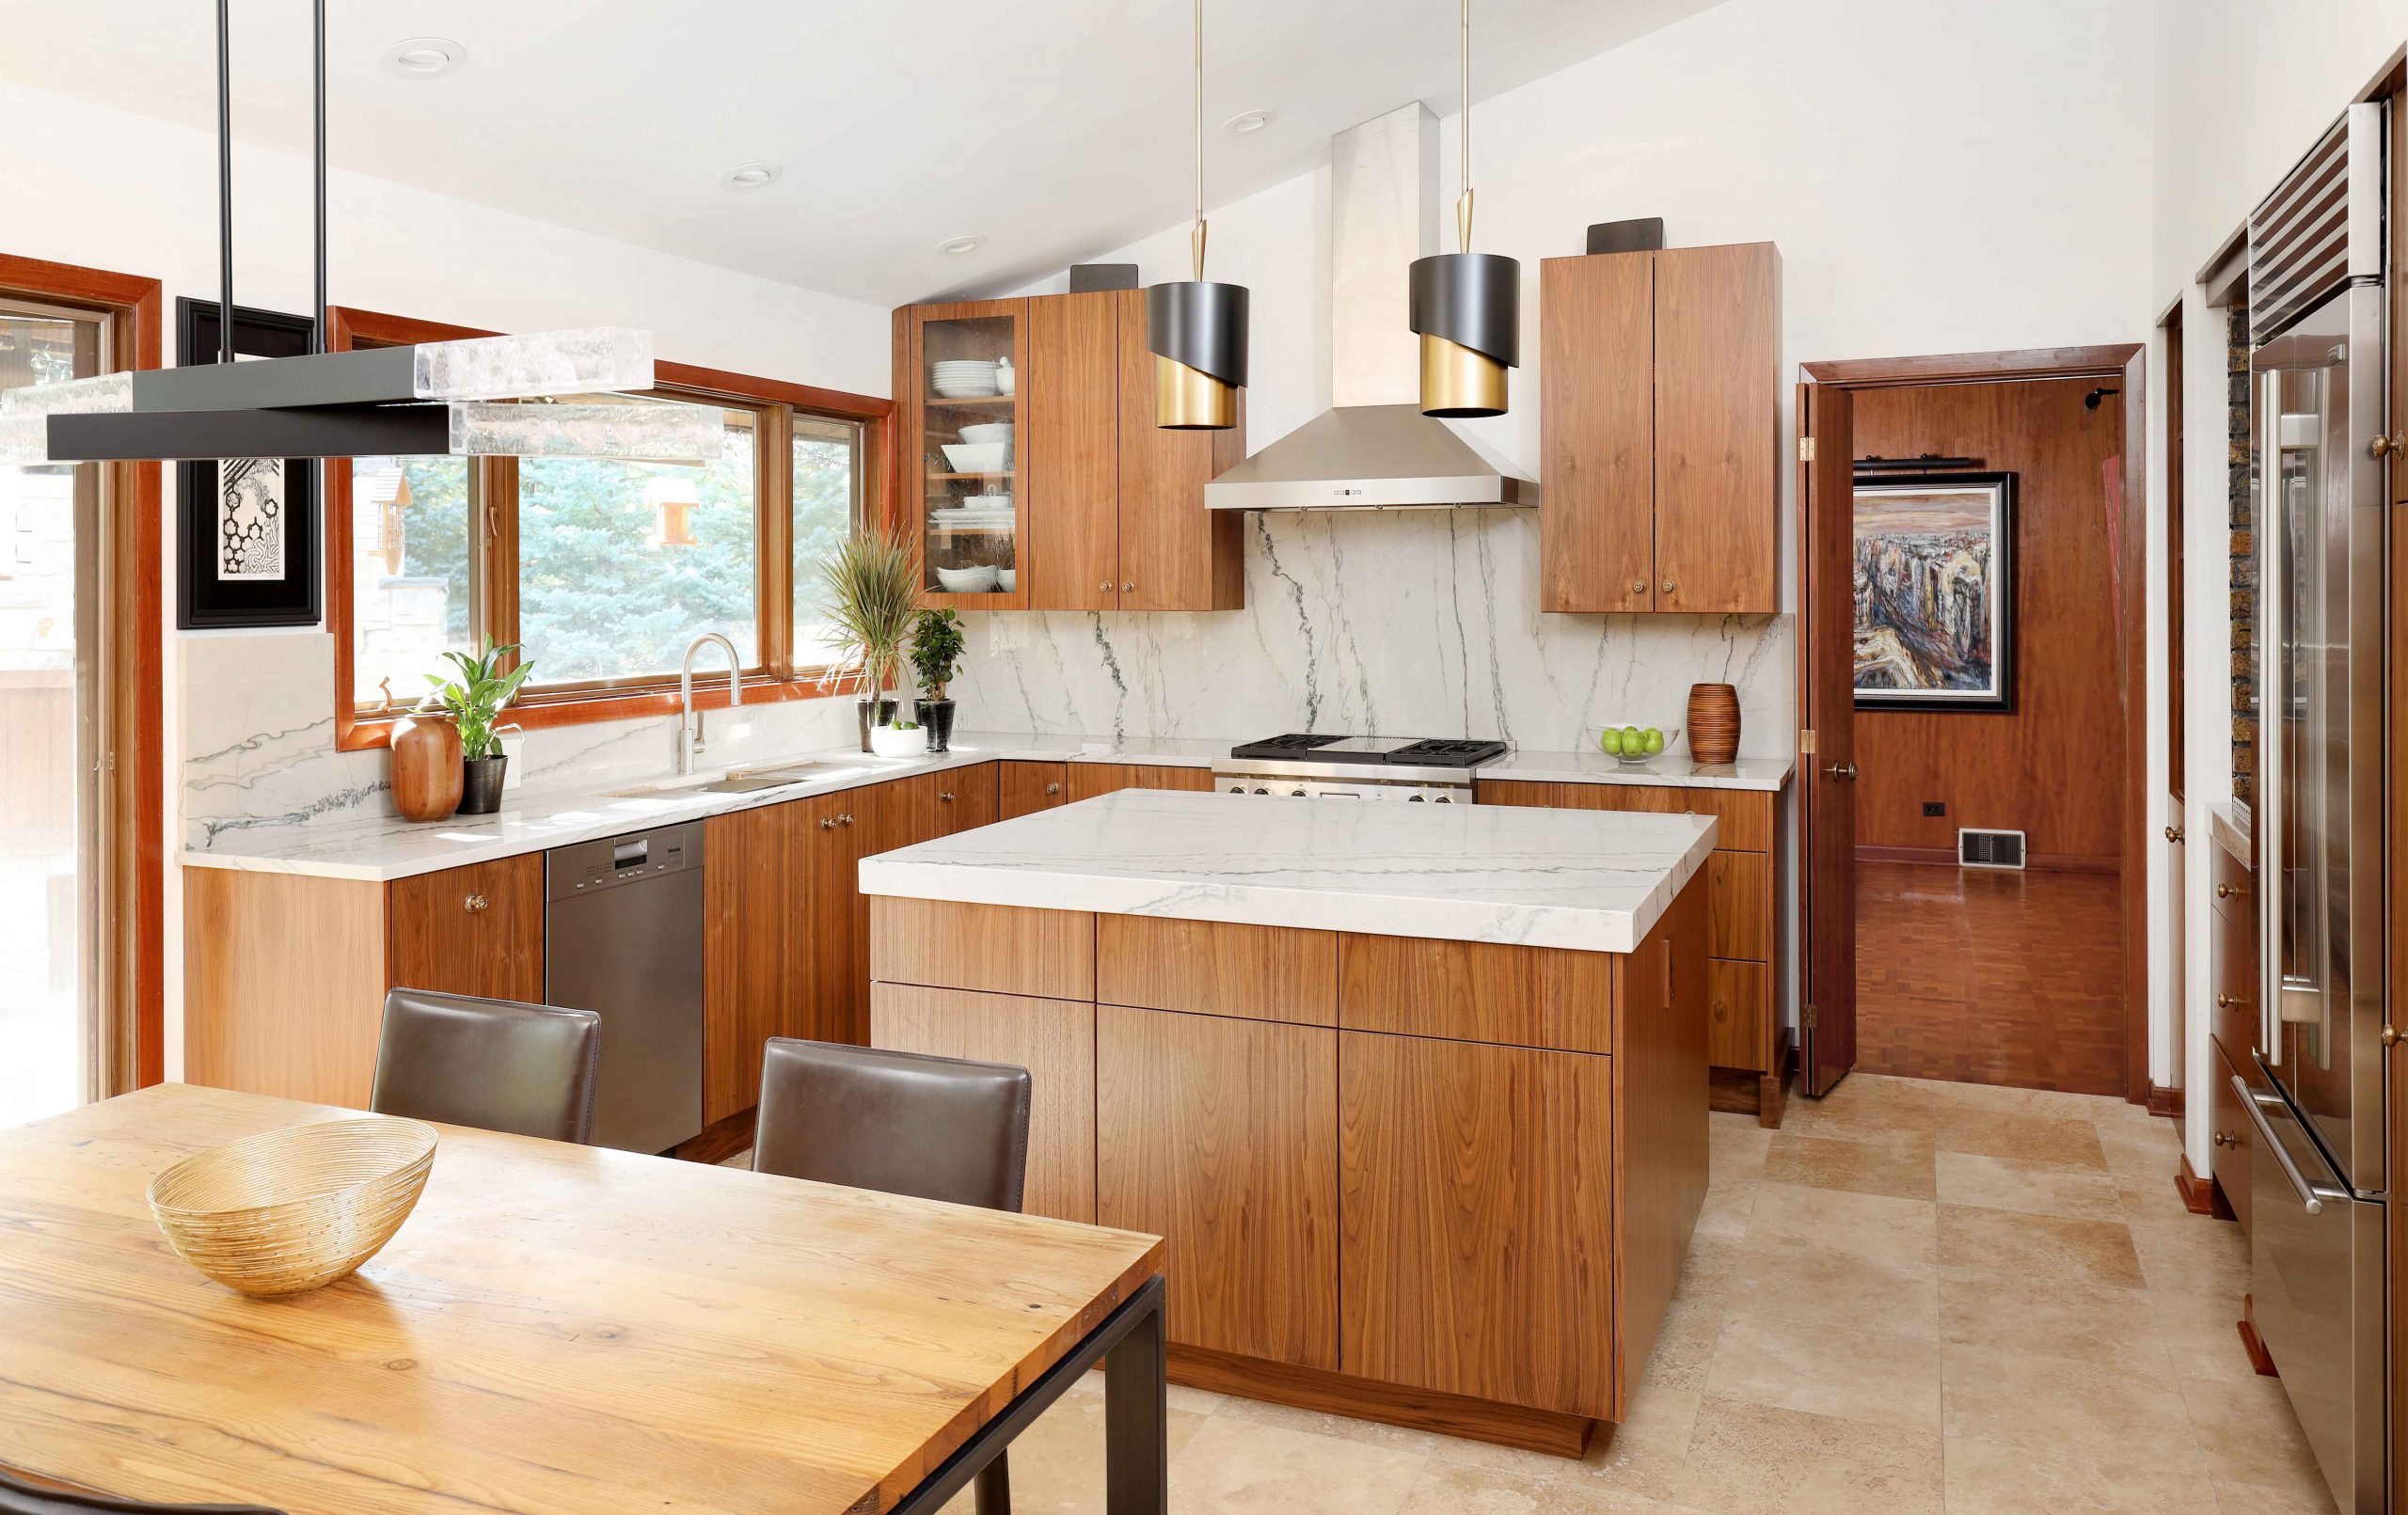 MCM kitchen with large tiled floor that transitions to hardwood